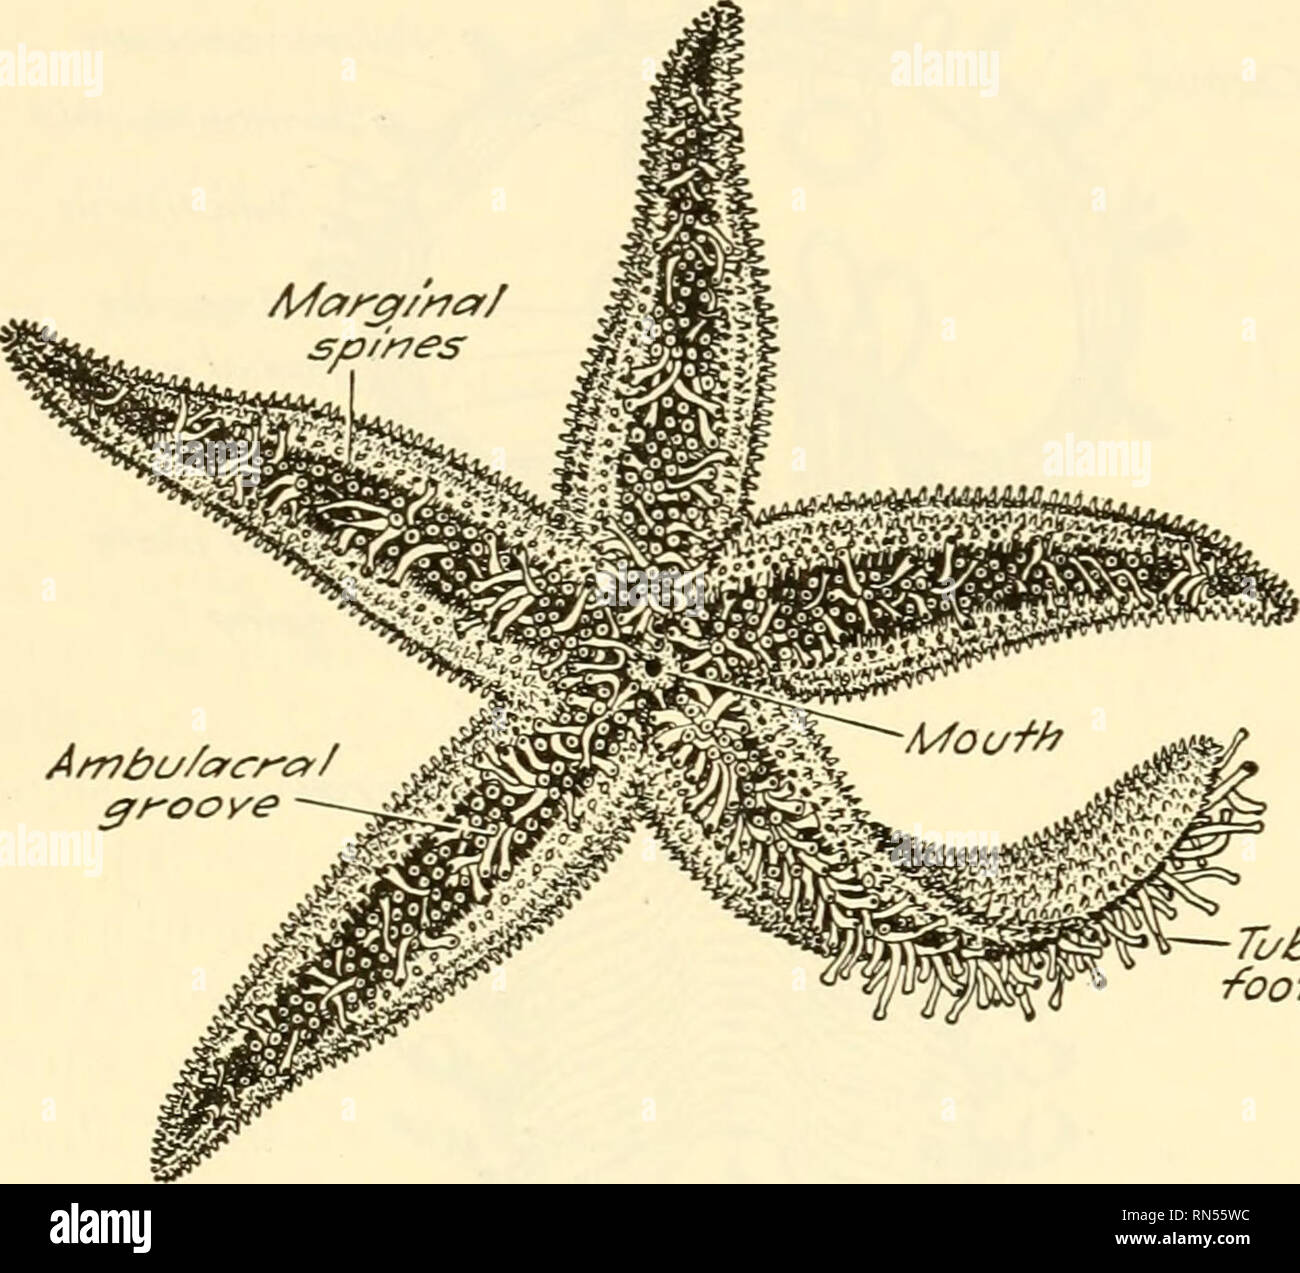 . Animal biology. Zoology; Biology. STARFISH 195 224. External Appearance.—A typical starfish is an animal consisting of a disc from which arise five rays. The bases of these rays occupy the whole circumference of the disc, but they taper to blunt points at their tips. The upper, aboral surface (Fig, 108) is covered with spines, around the base of which are grouped very minute organs known as pedicellariae. When examined under the microscope a pedicellaria (Fig. 110 A) is seen to possess two jaws which differ somewhat in different types. These structures serve to rid the surface of the body of Stock Photo